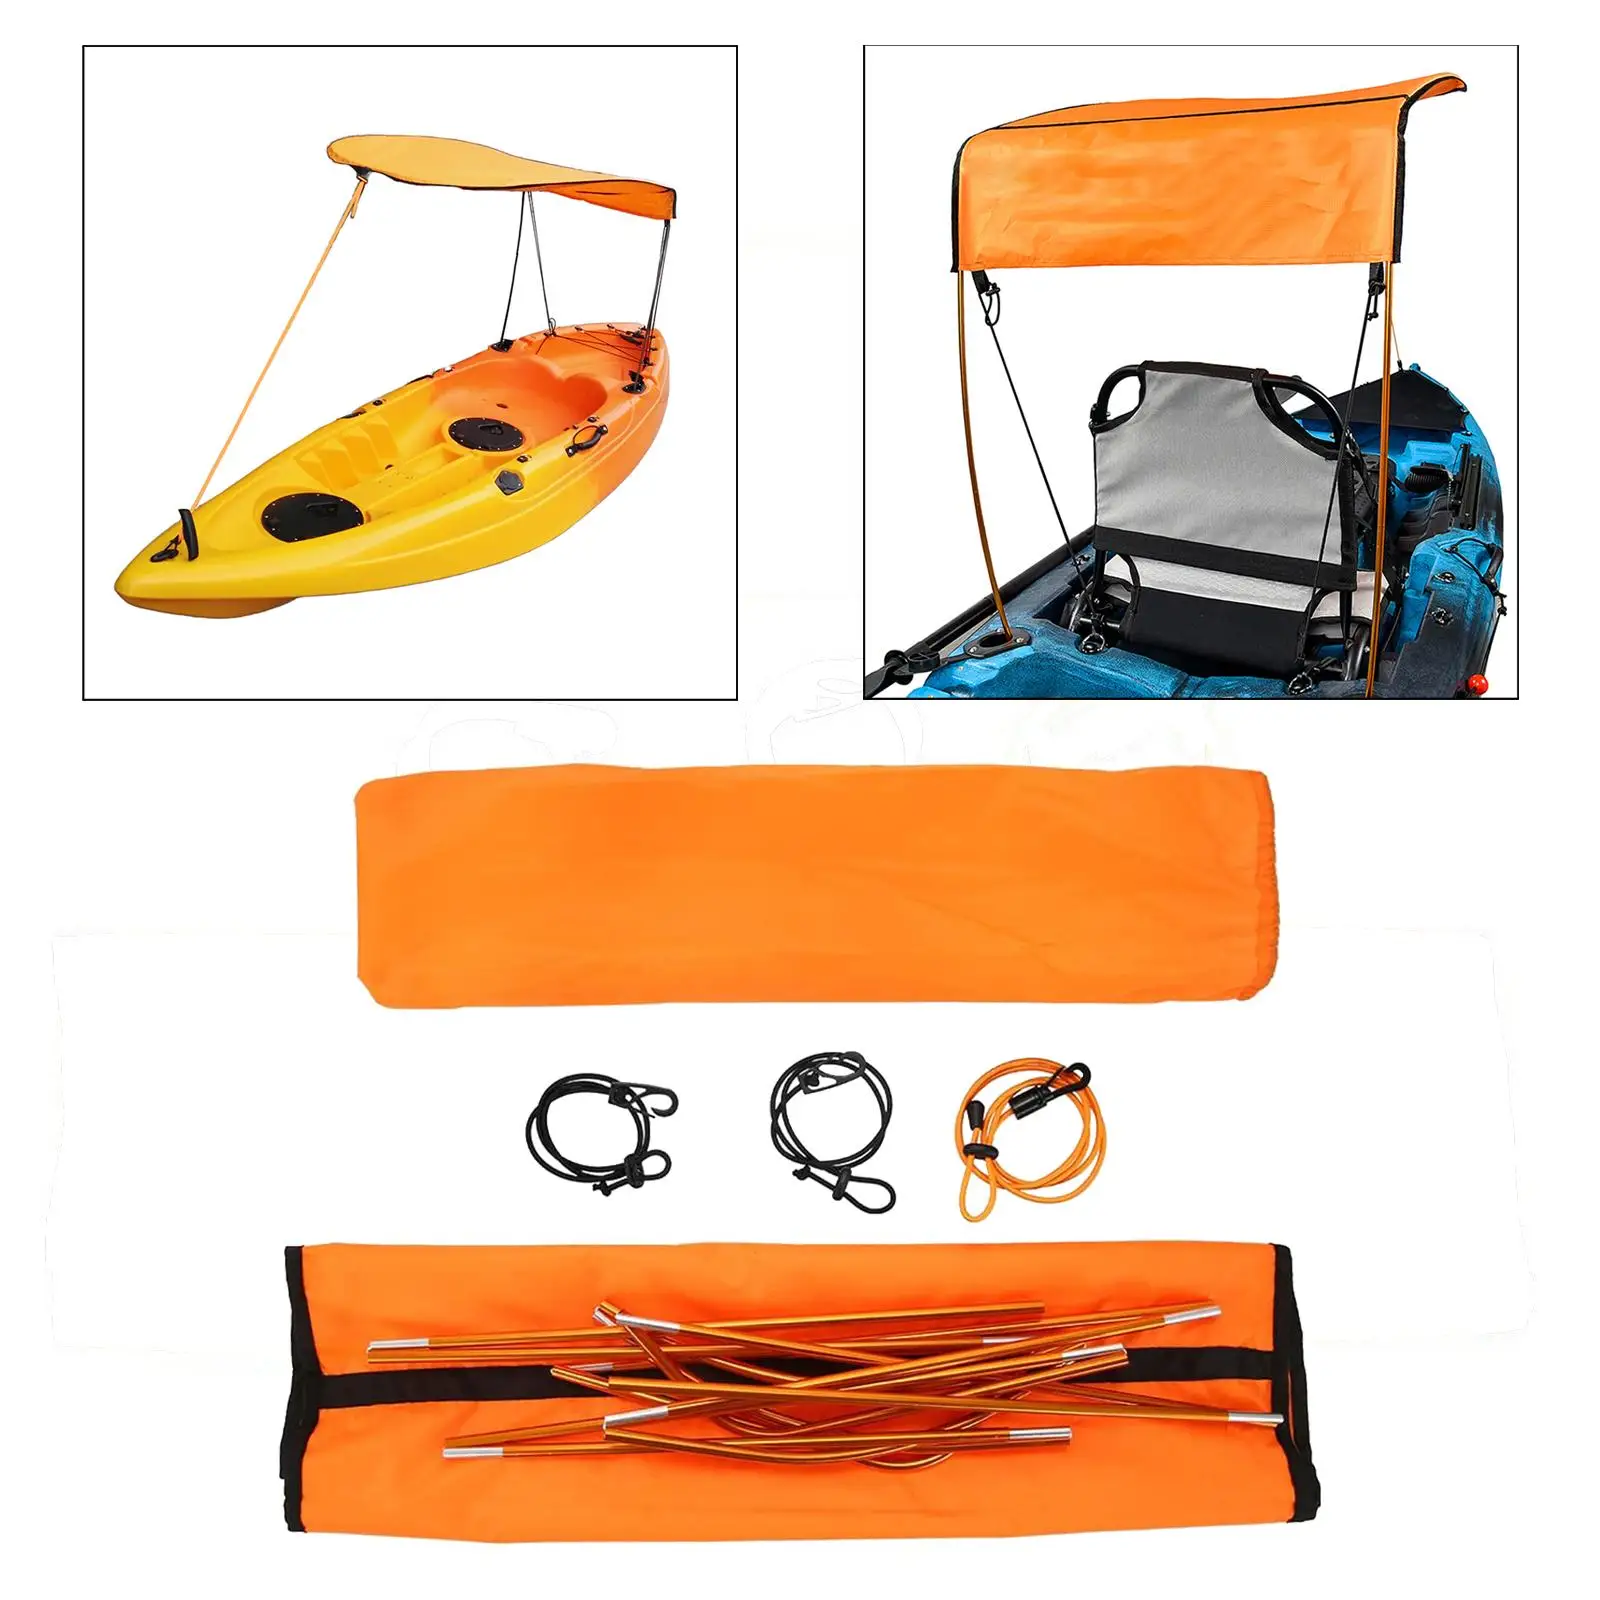 Kayak Boat Sun Shelter Canopy Awning with Storage Bag for Picnic Outdoor